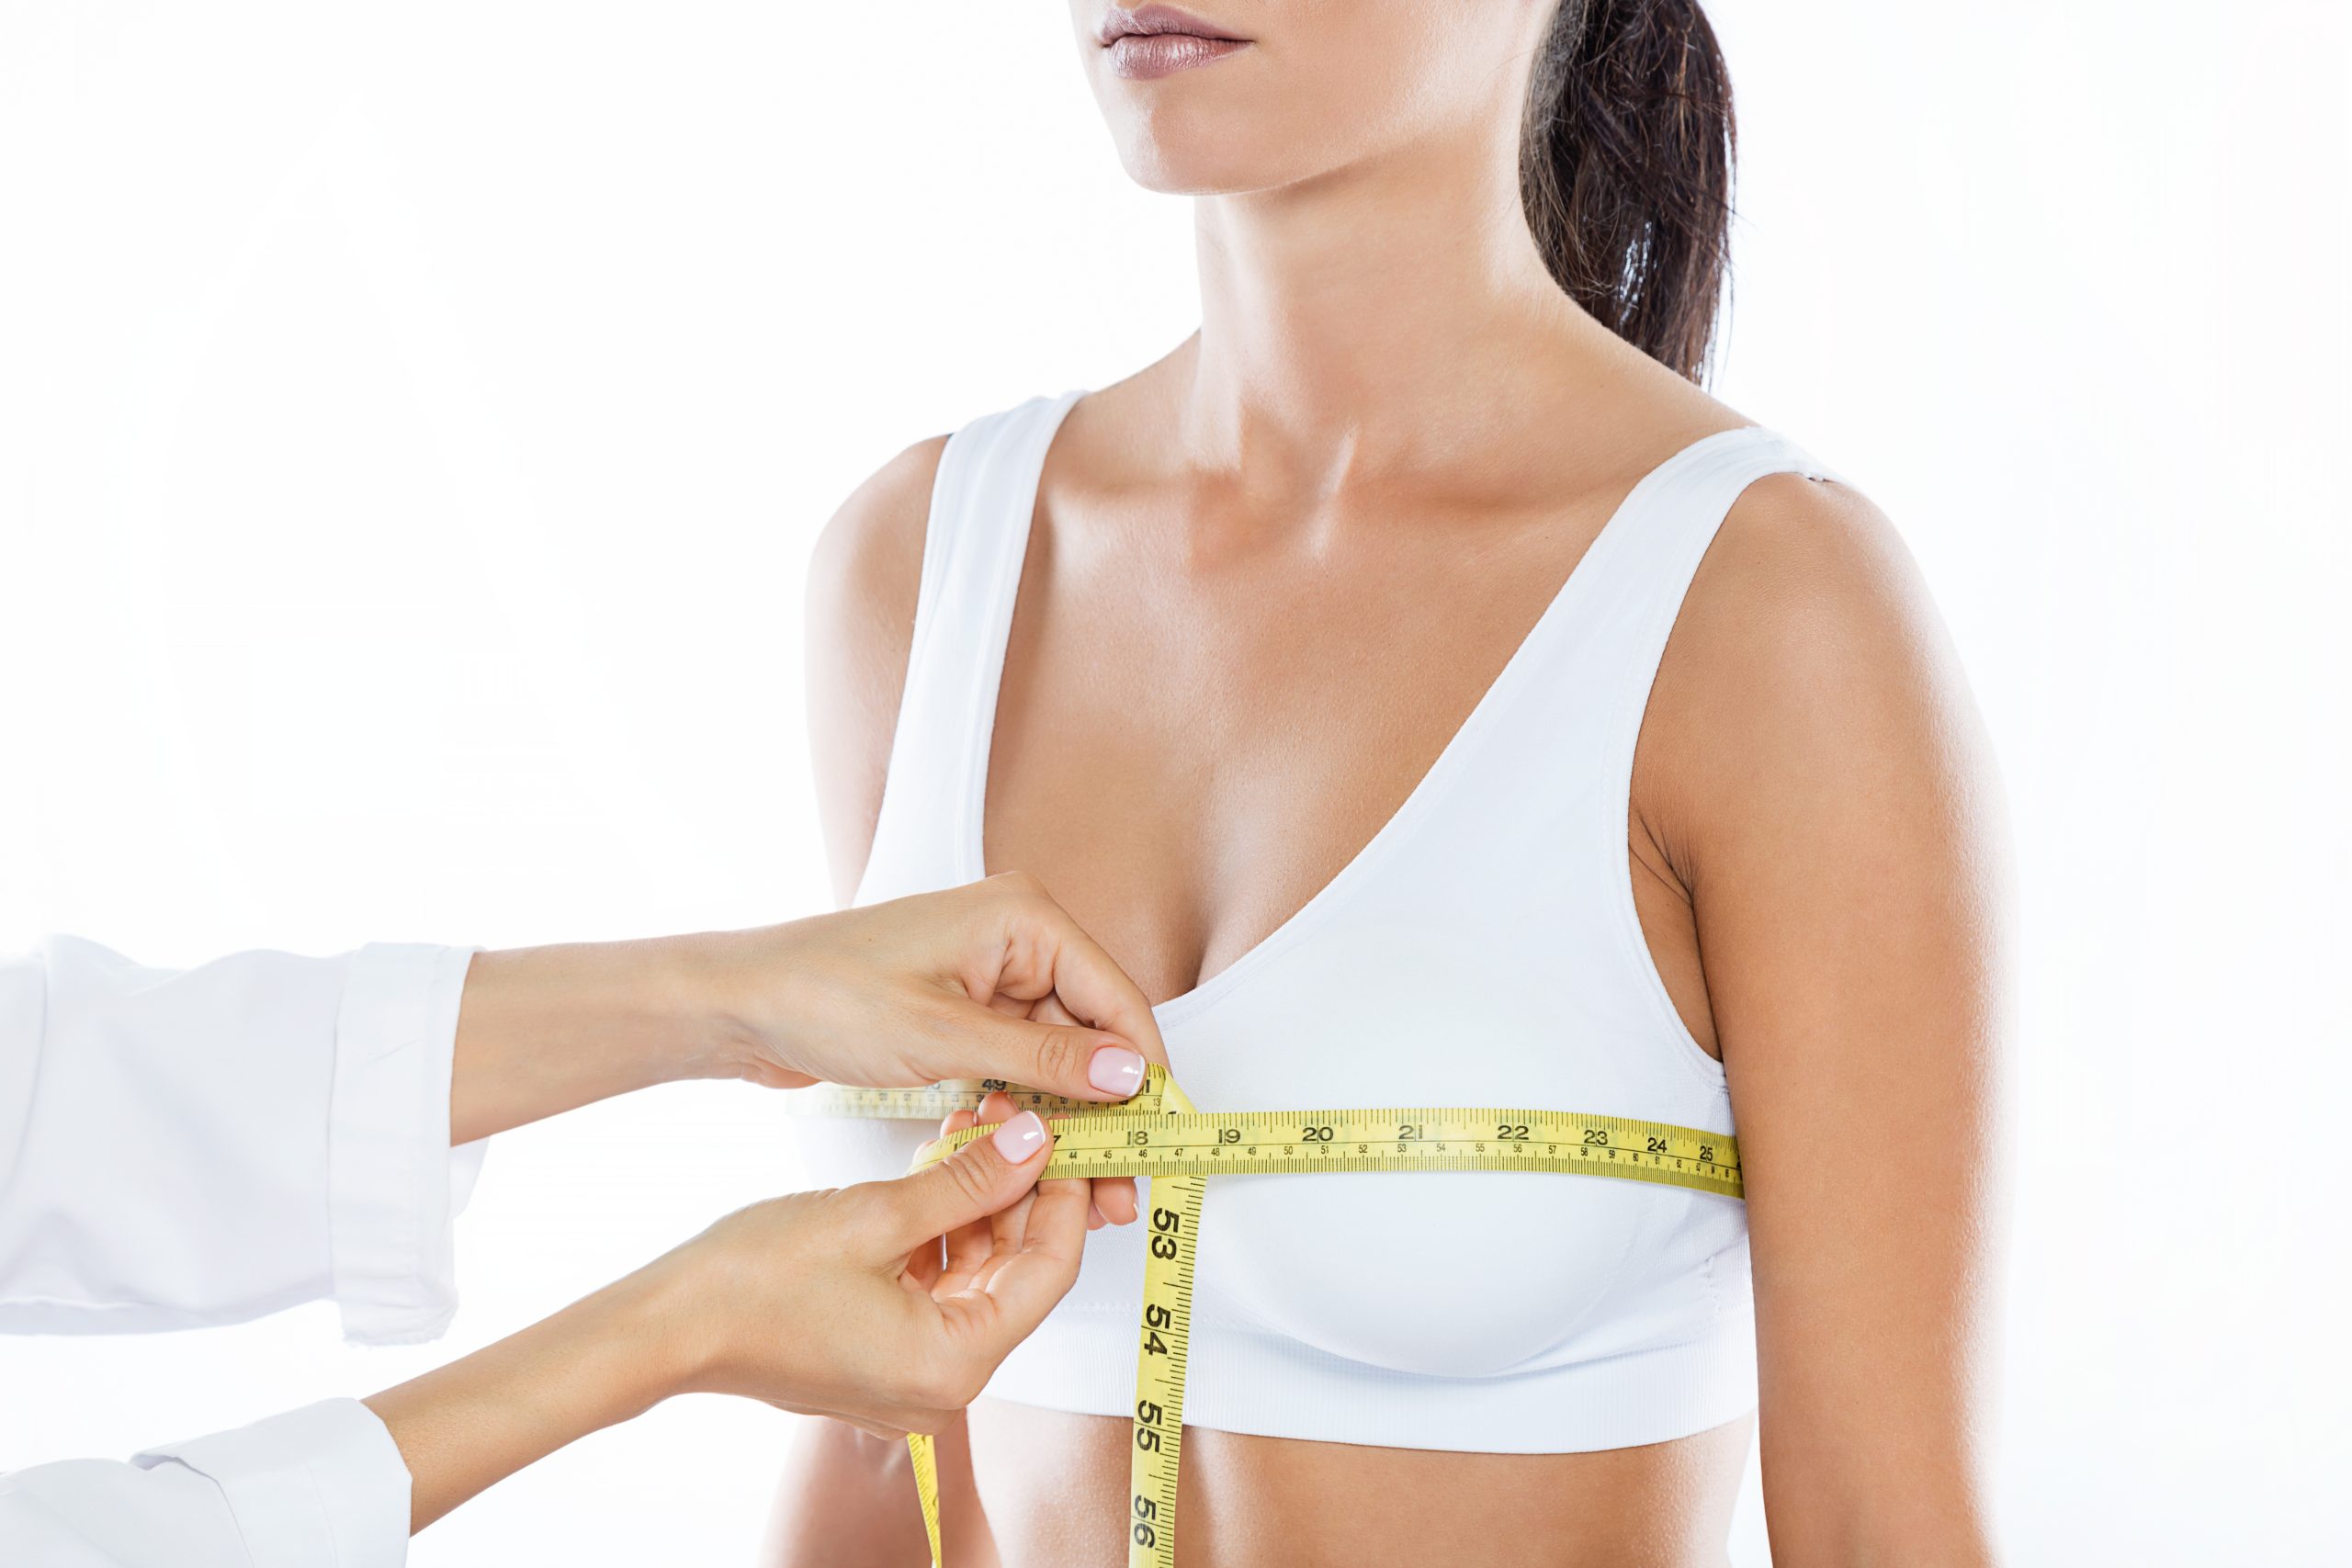 Top 5 Facts You Should Know about Breast Lift Surgery